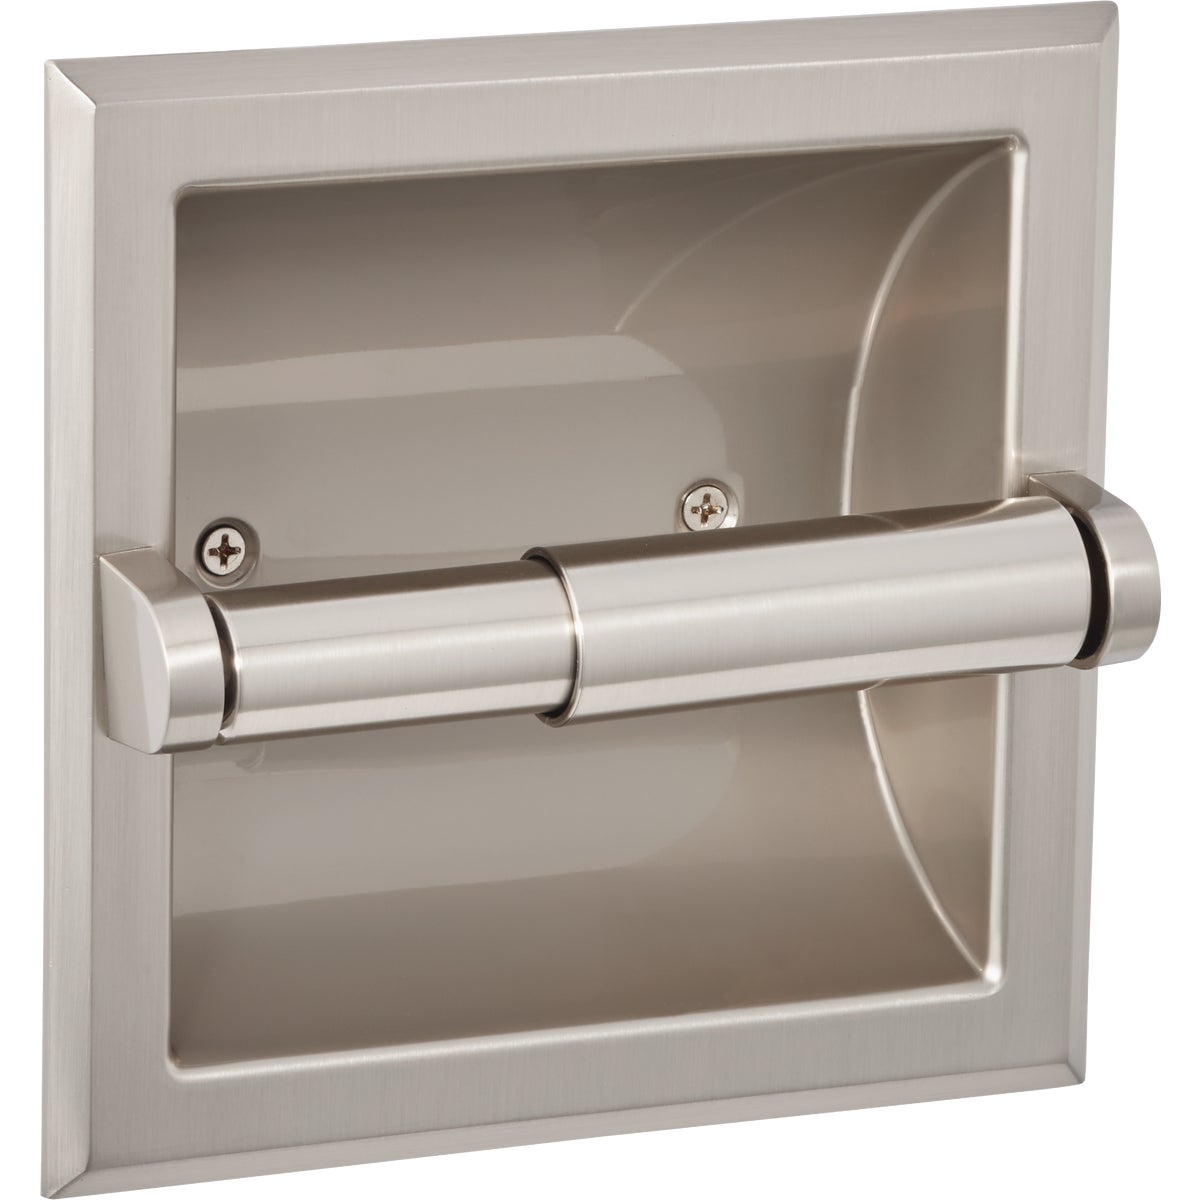 Item 401095, Recessed toilet paper holder with concealed mounting screws.